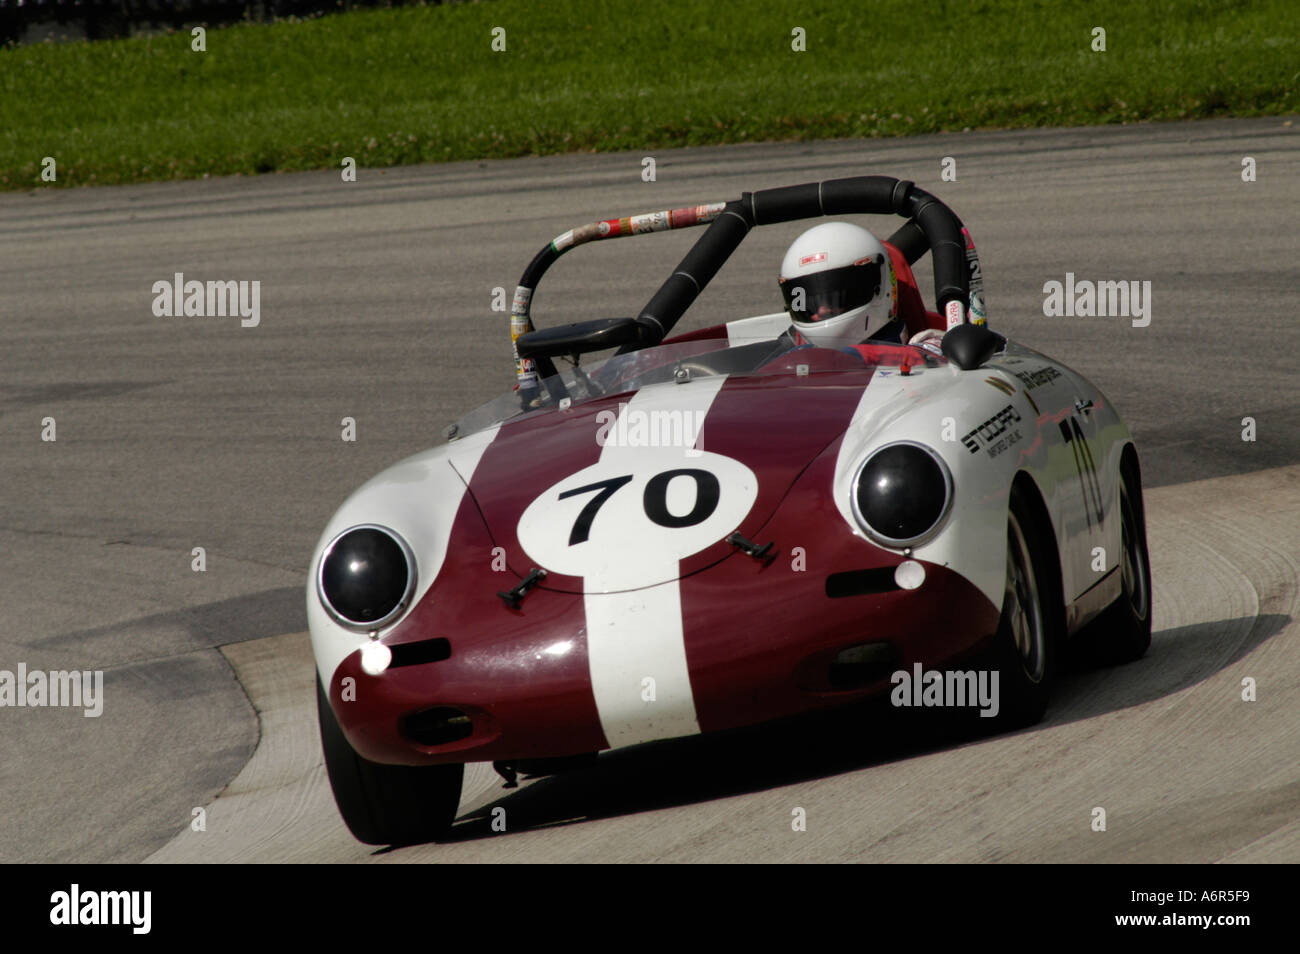 Vic Skirmants Races His 1961 Porsche 356 Roadster At The Svra Sprint Stock Photo ...